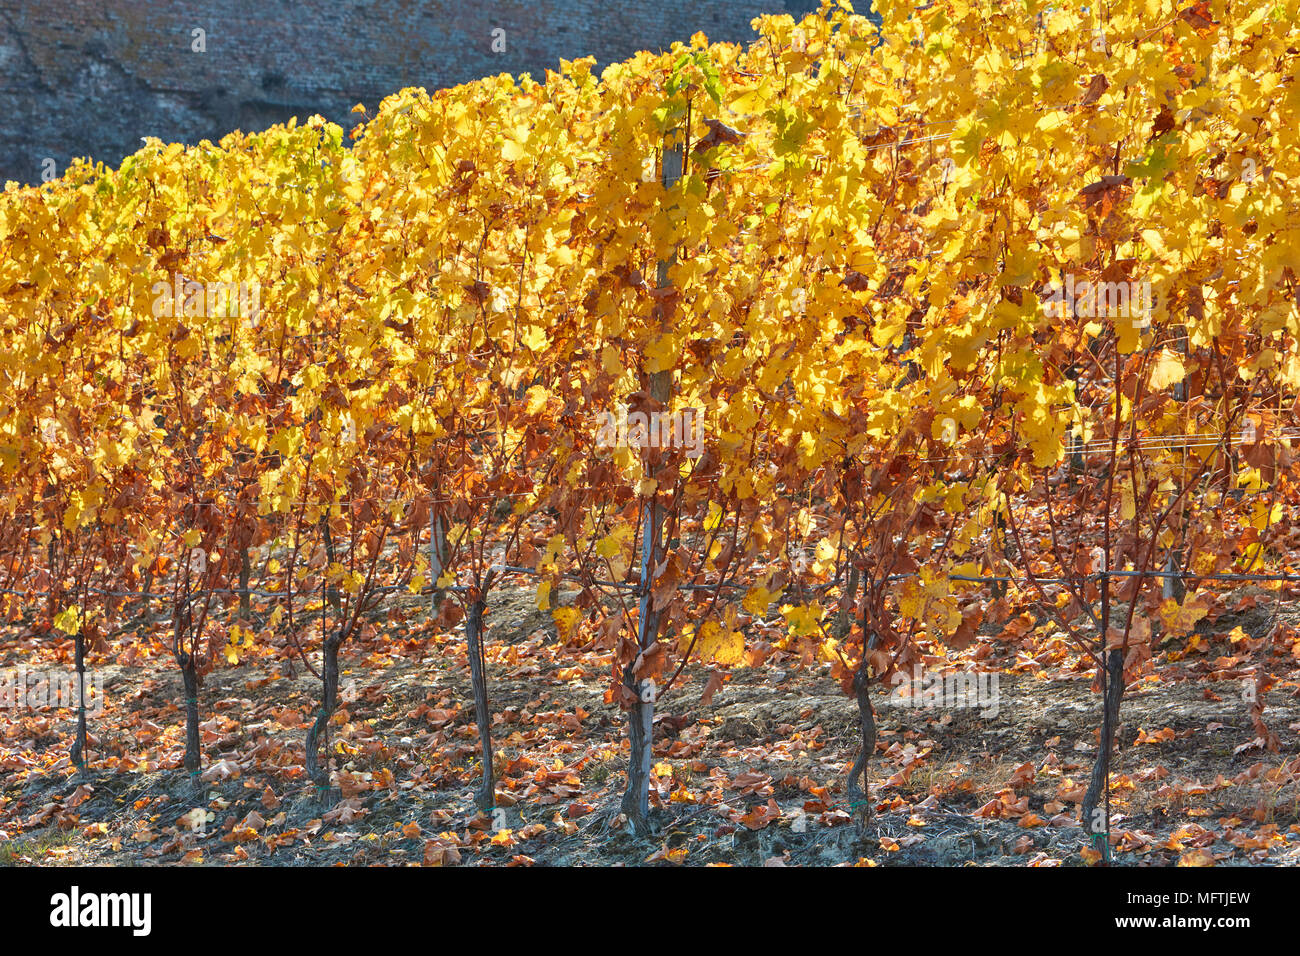 Vineyard in autumn with yellow leaves, backlight Stock Photo